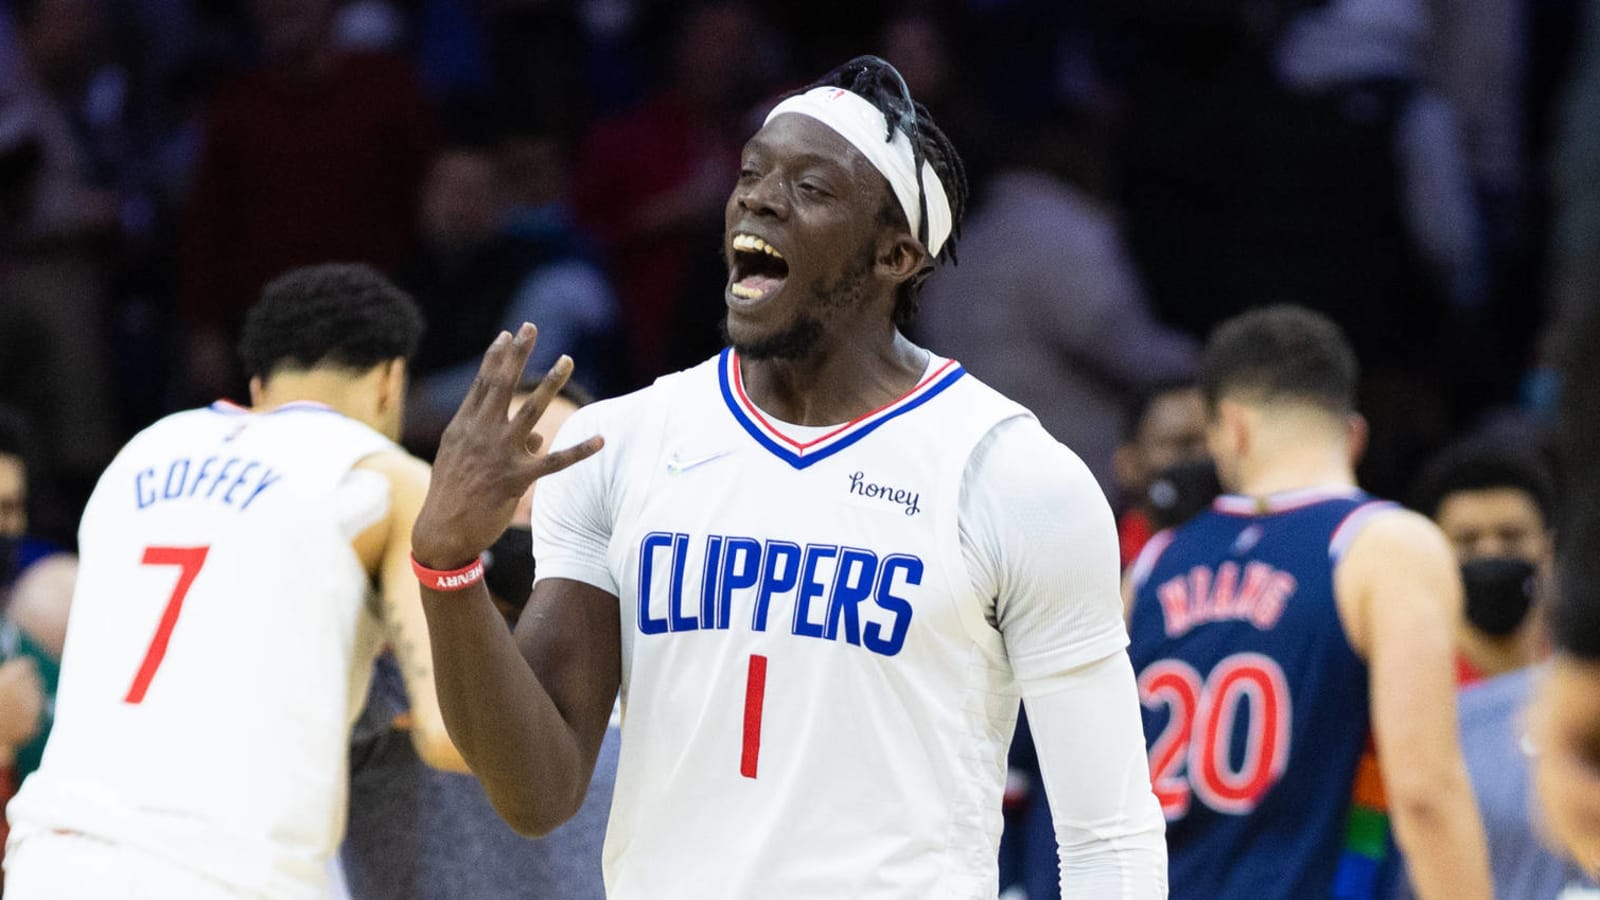 Clippers erase 24-point deficit in comeback win vs. 76ers